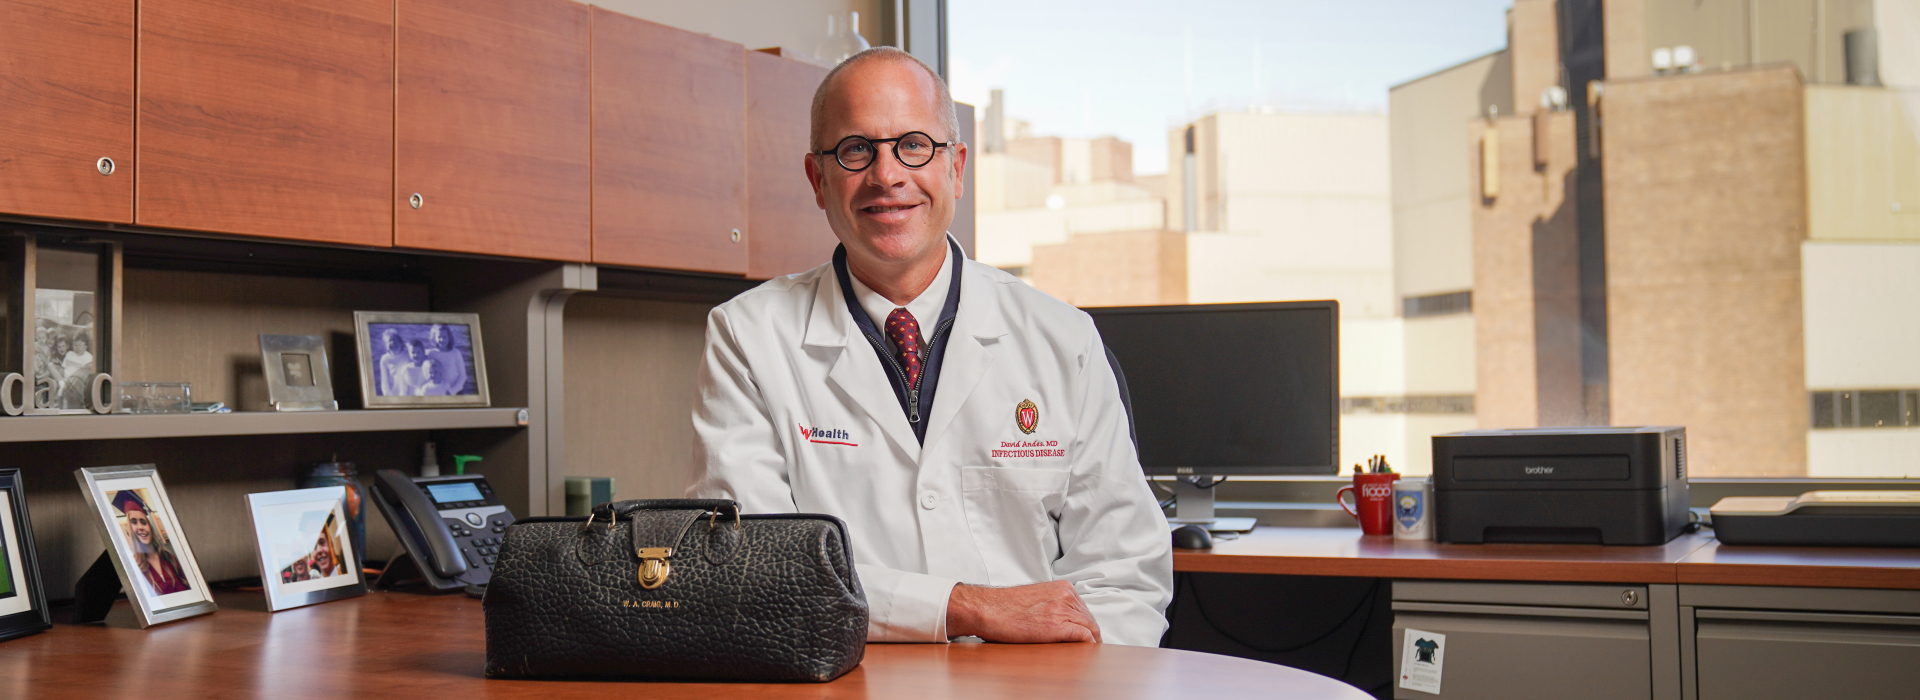 Dr. David Andes in his office with Dr. William A. Craig's medical bag on his desk